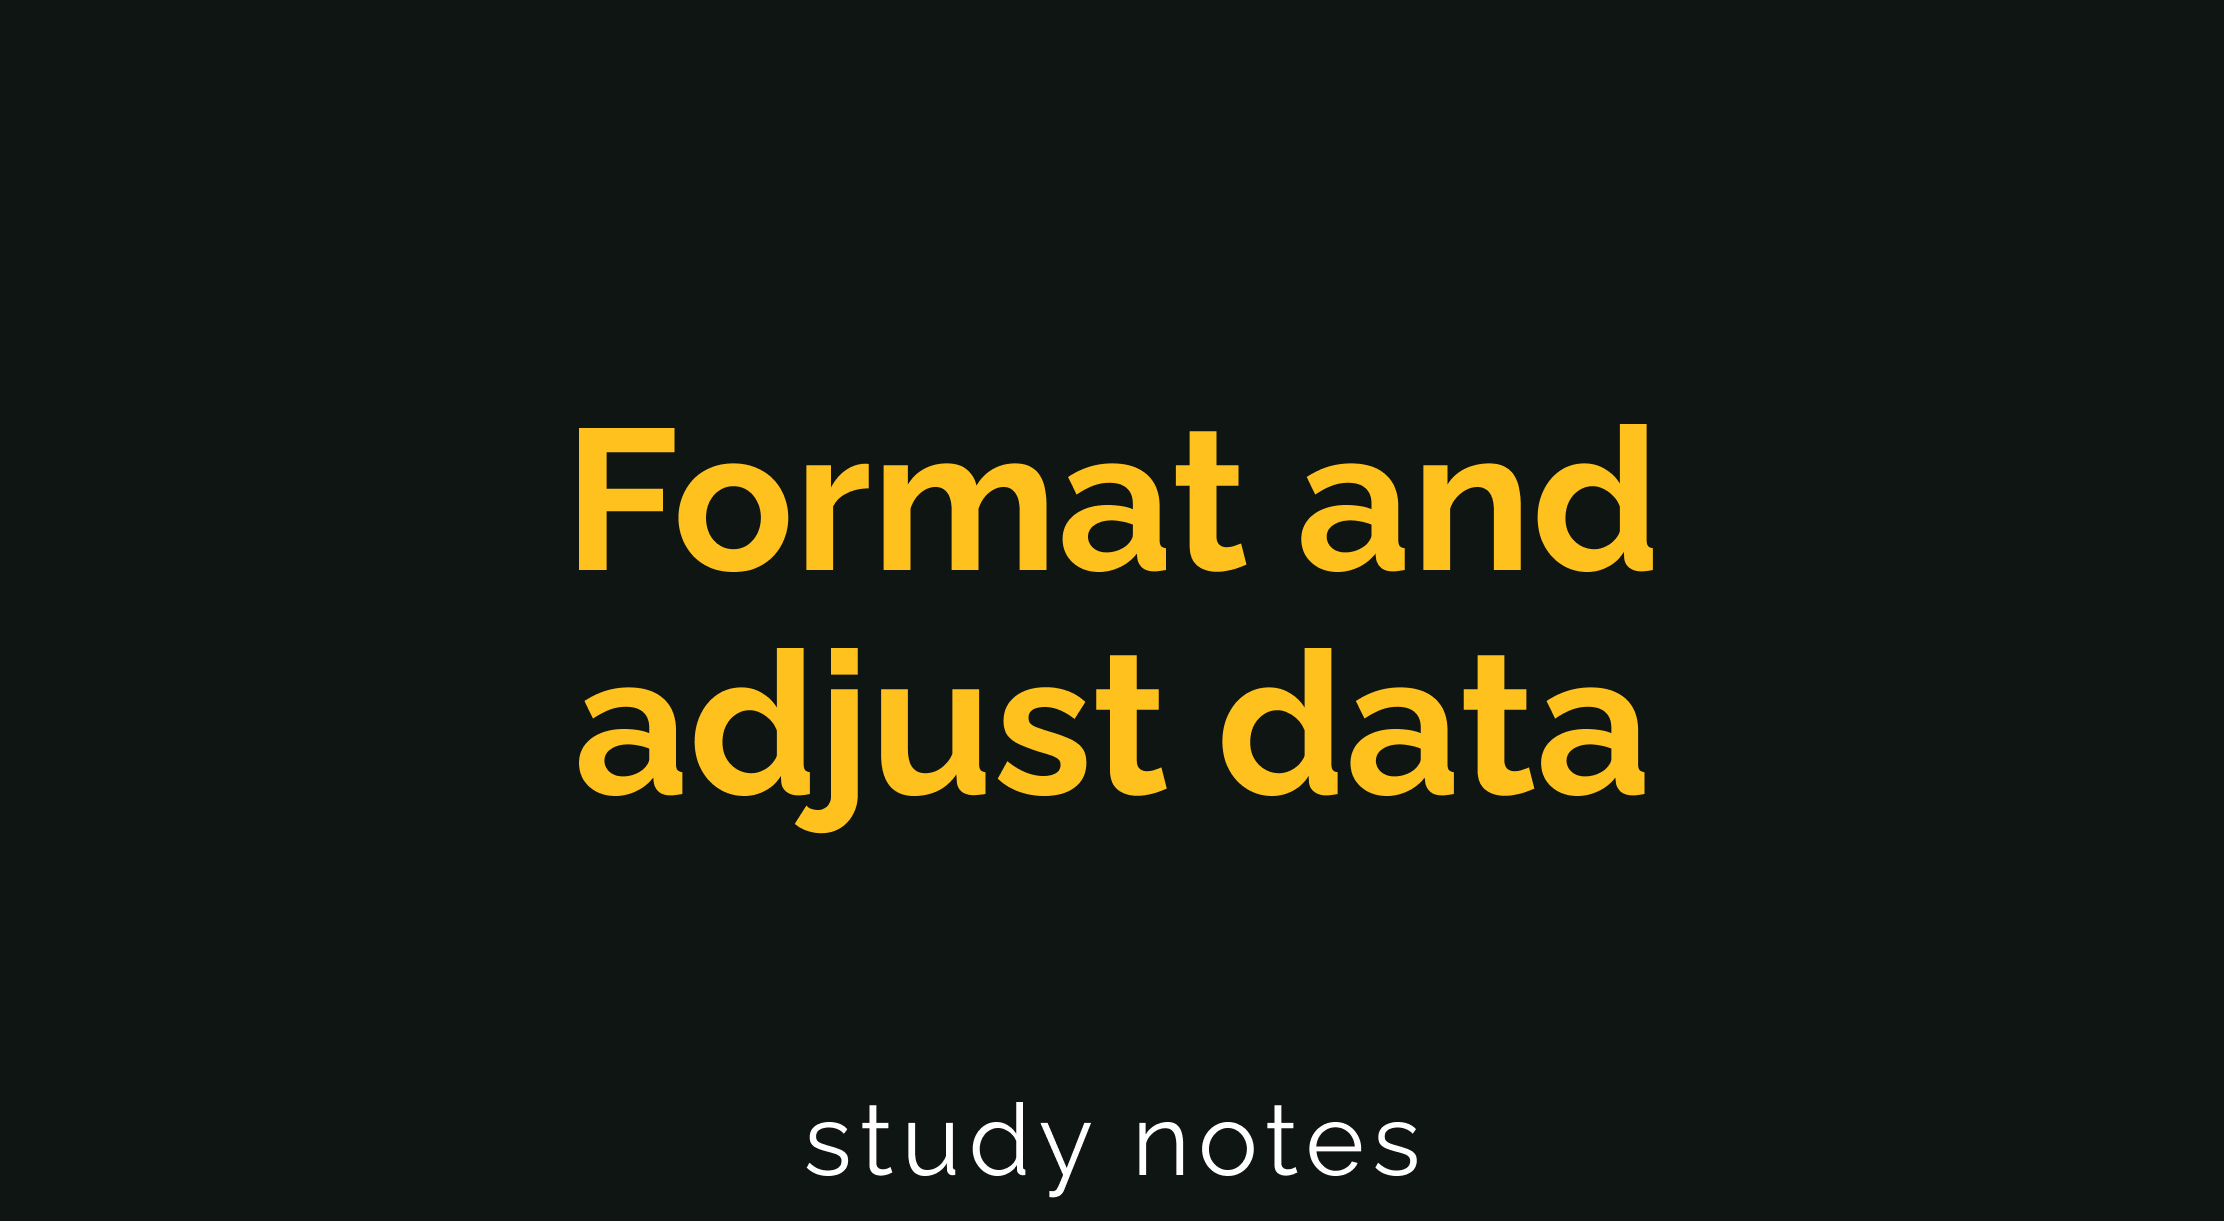 Format and adjust data